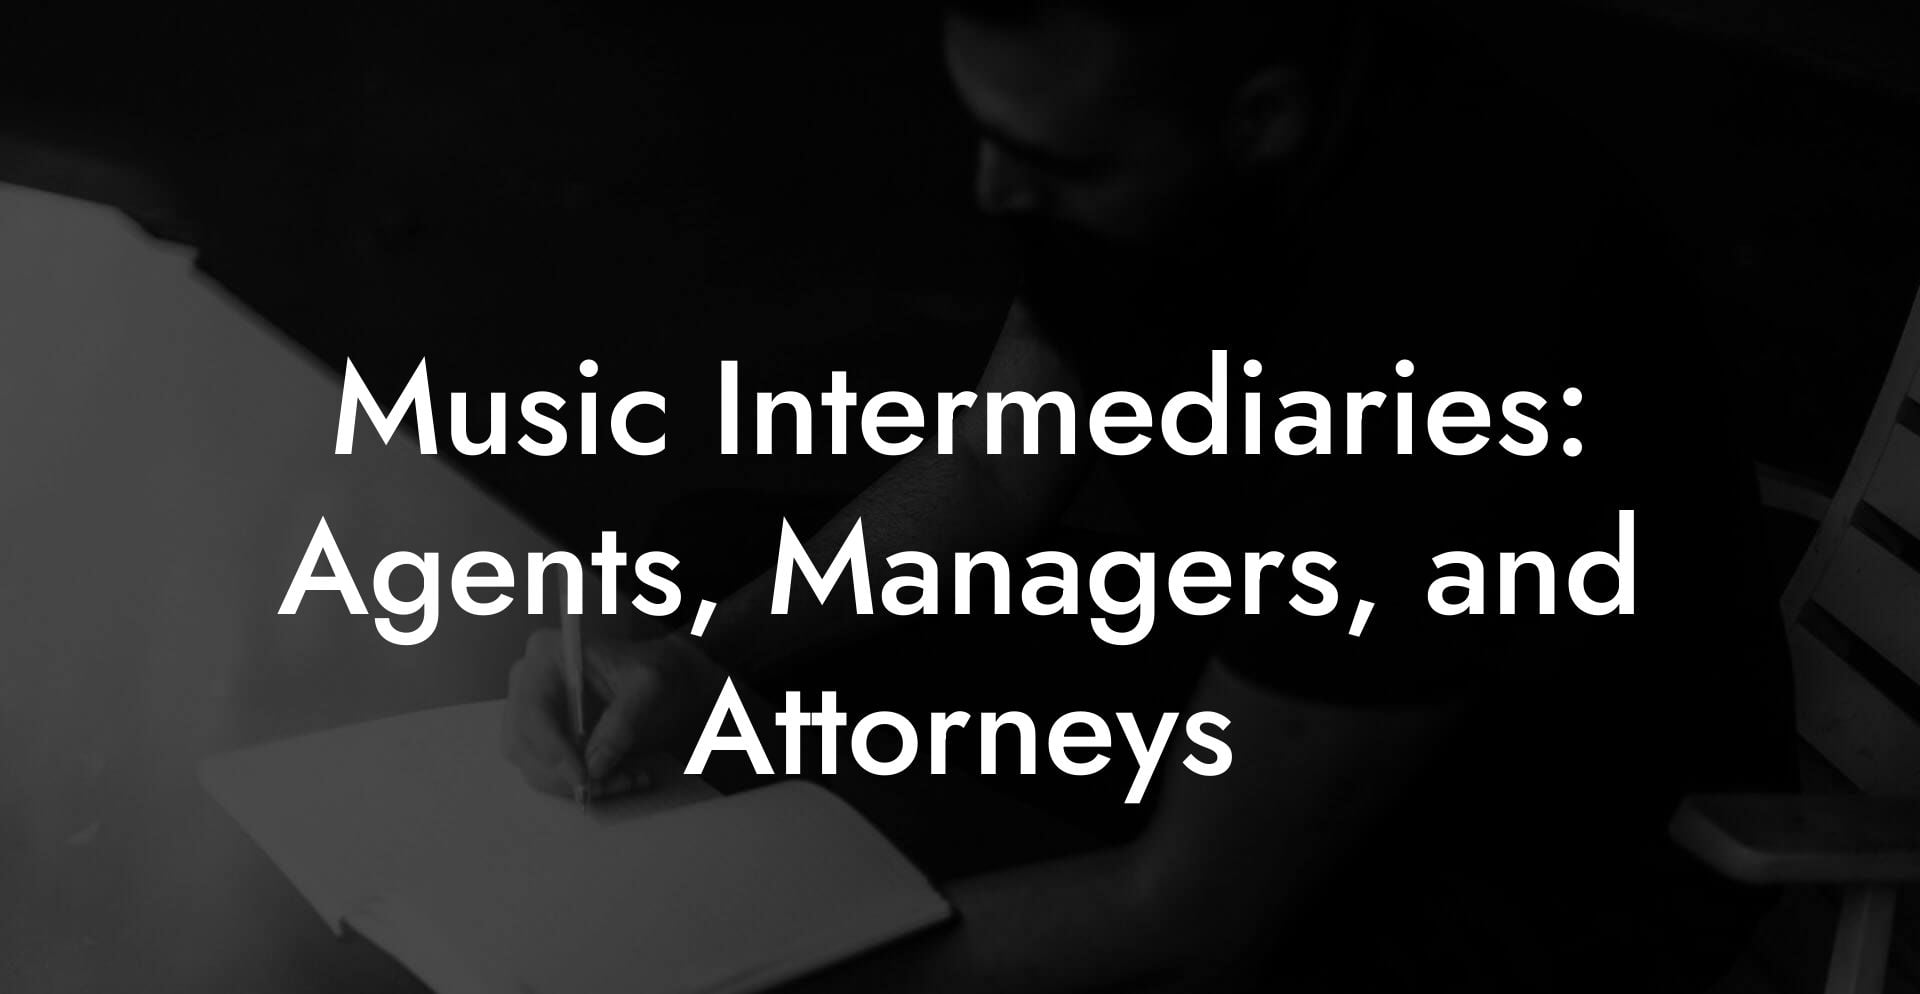 Music Intermediaries: Agents, Managers, and Attorneys